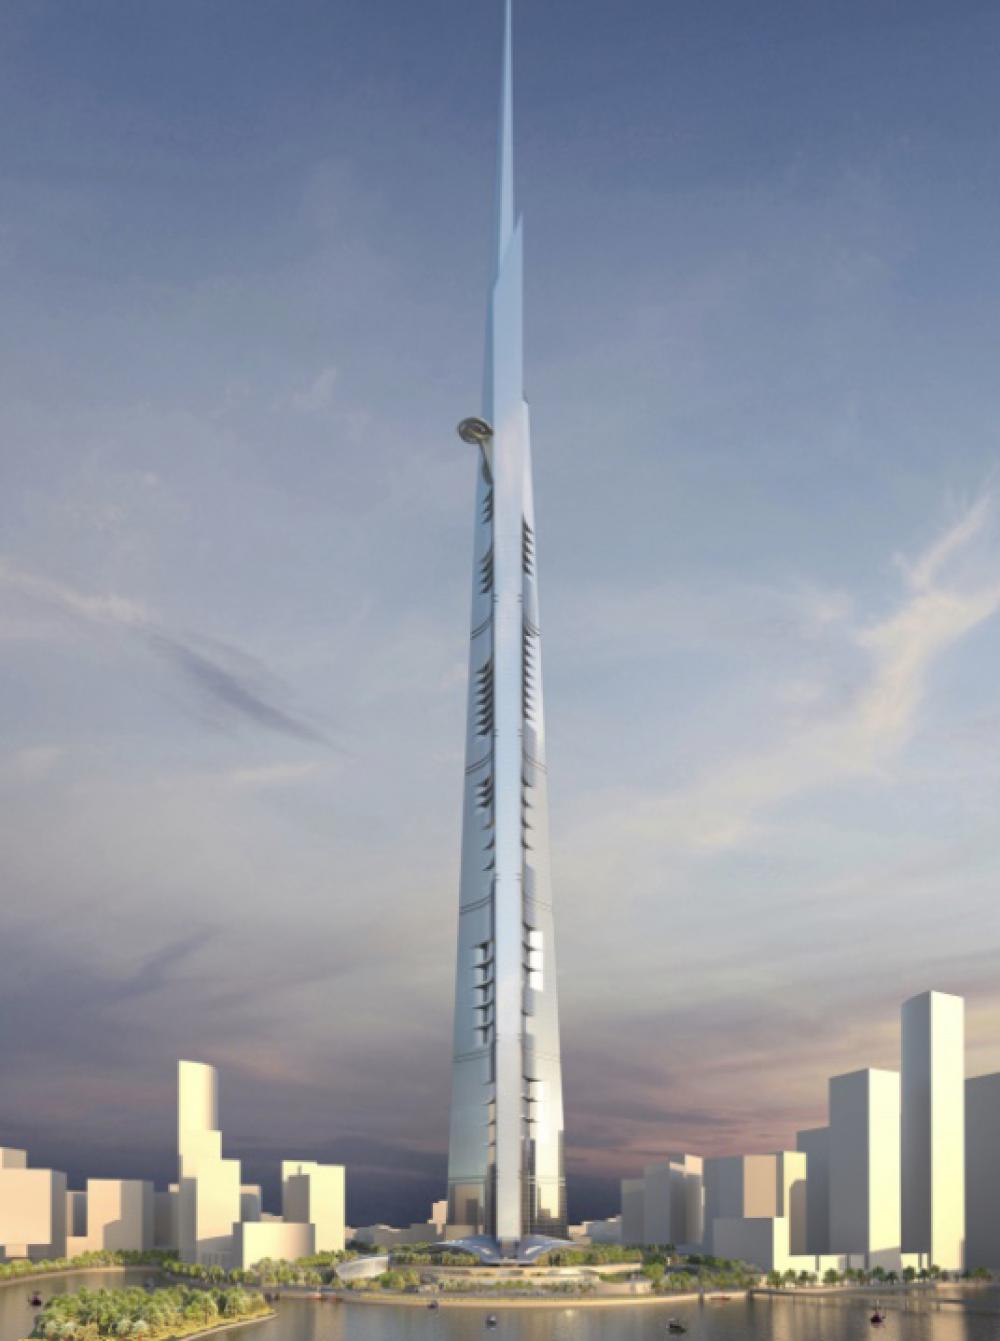 Figure 1. Jeddah Tower. Reprinted from Smith and Gills. http://smithgill.com/work/ jeddah_tower/